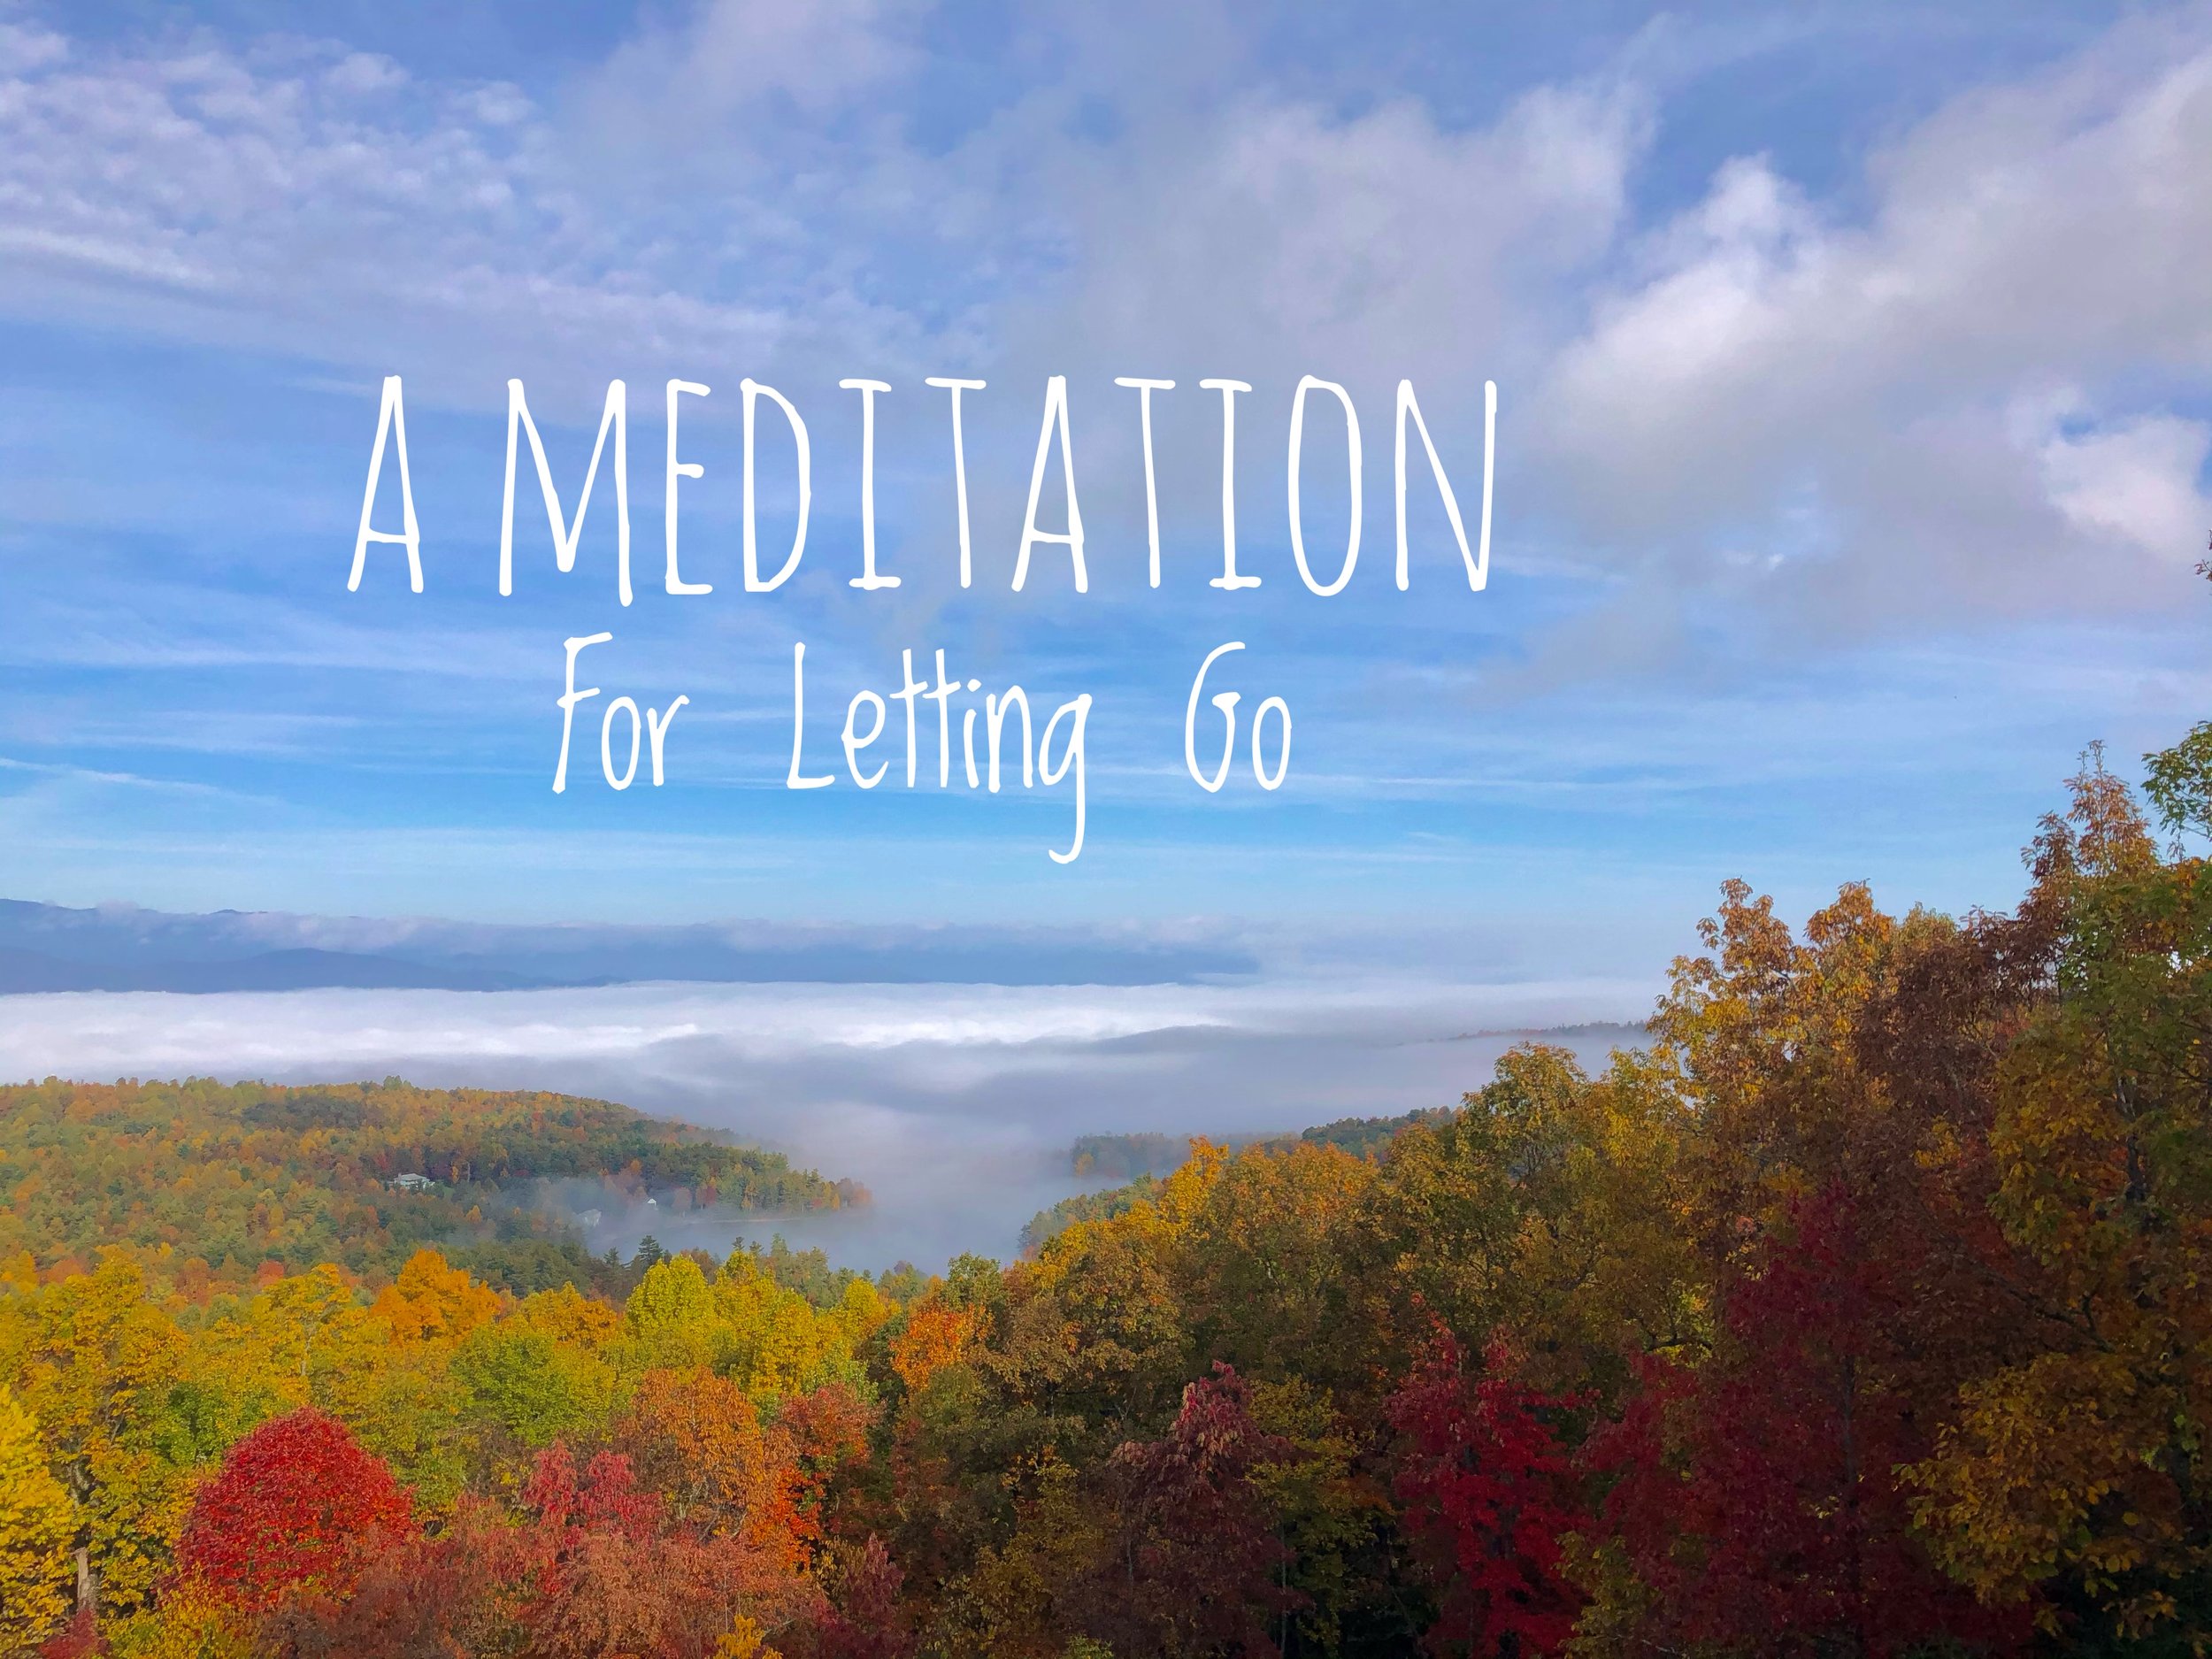 meditation for letting go release be still mindfulness reduce tension mental clarity reduce stress reduce burnout worklife balance guided meditation.JPG